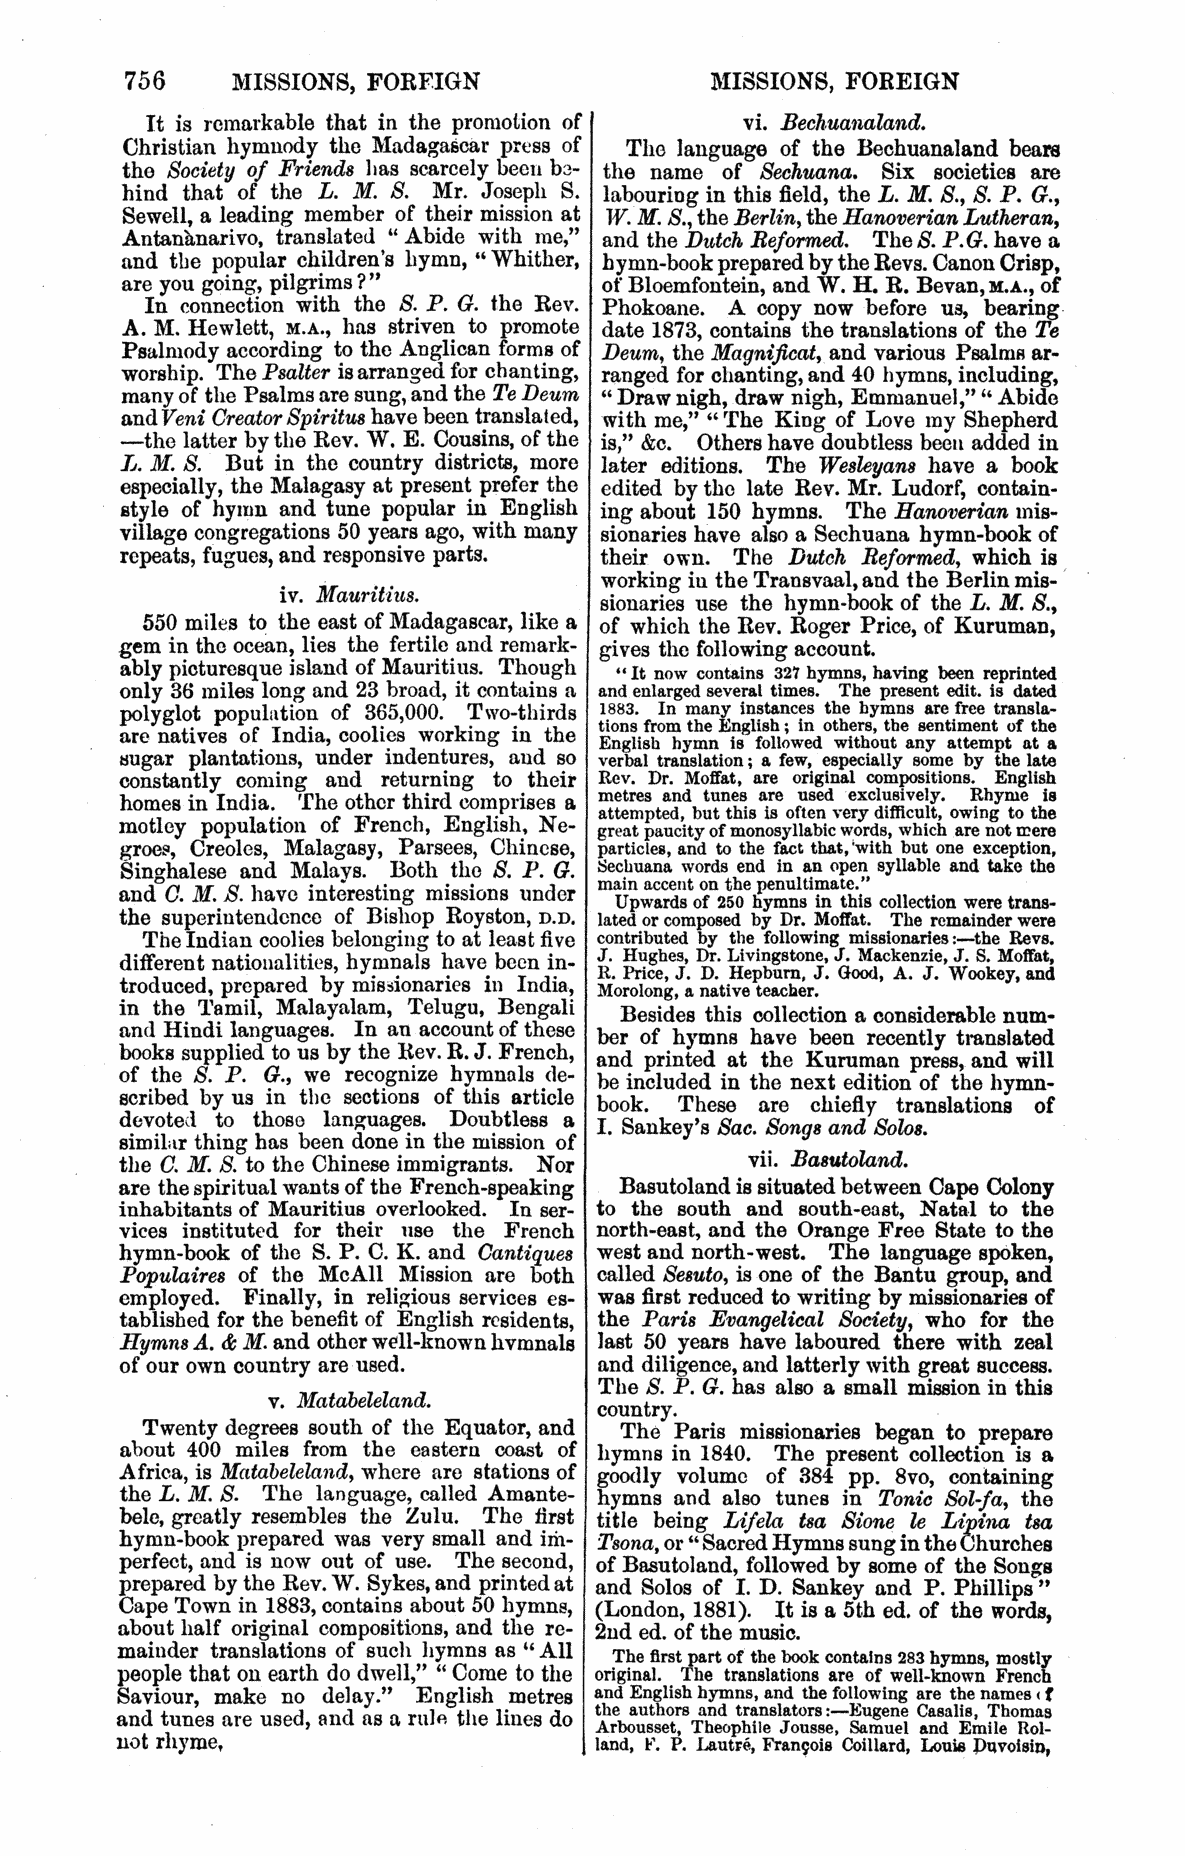 Image of page 756